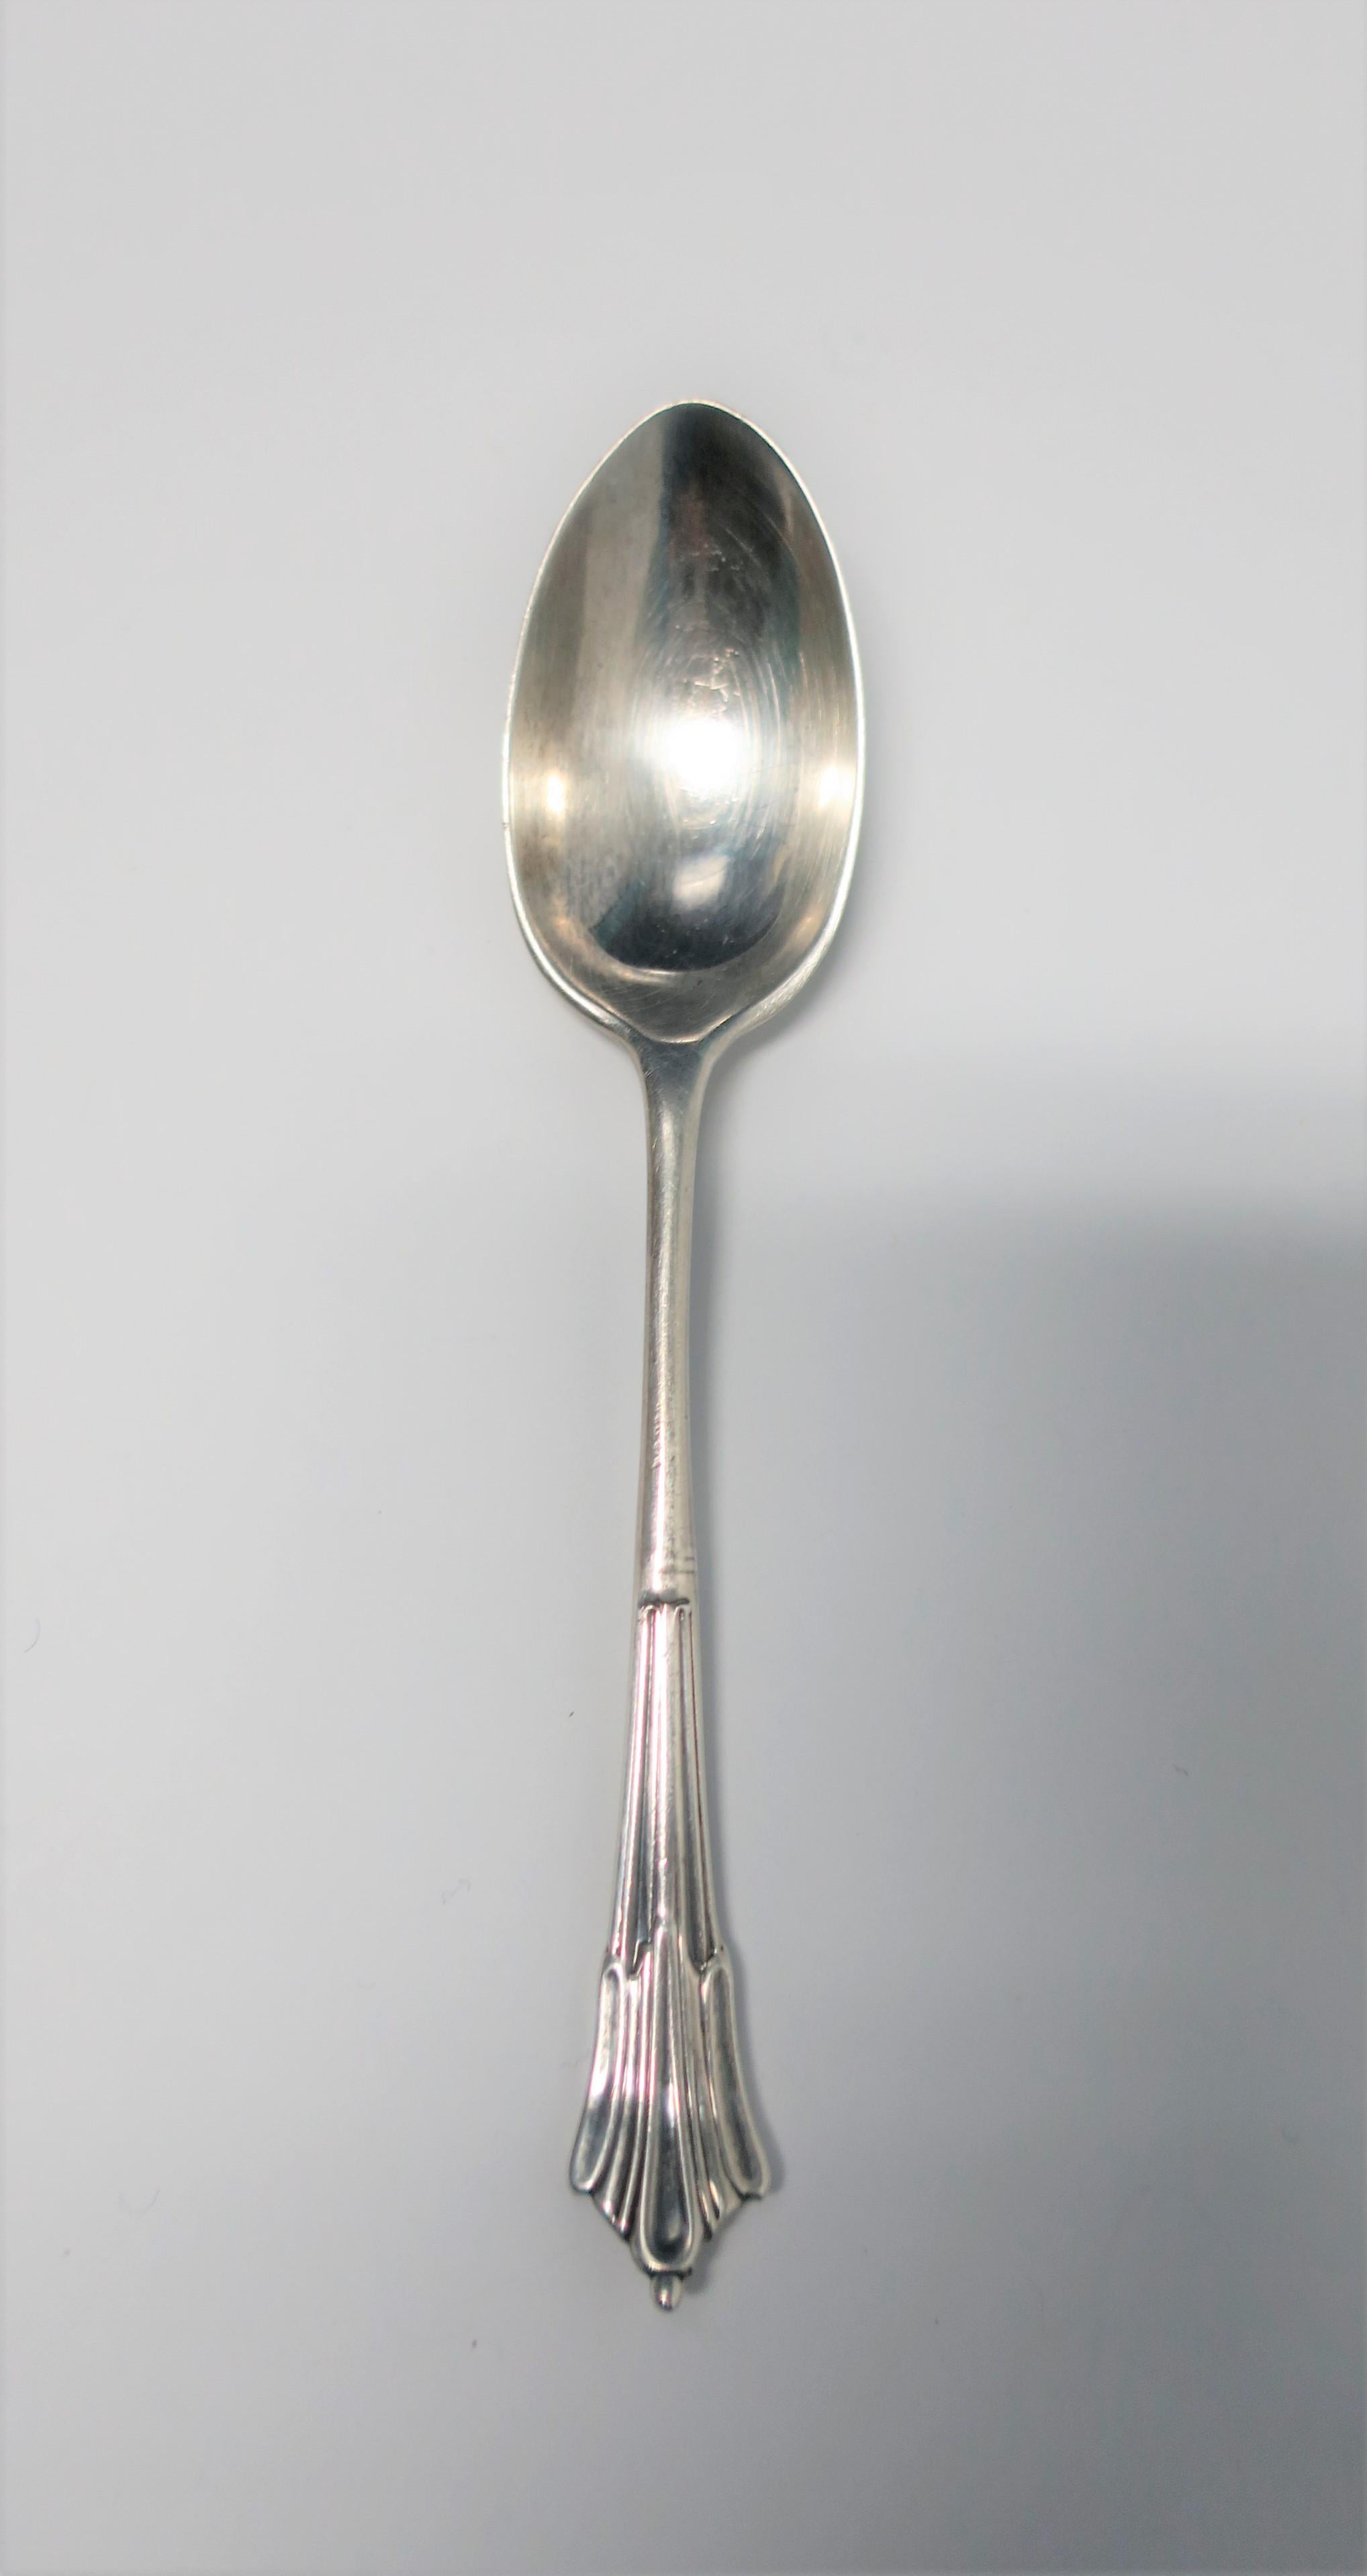 A beautiful set of six English sterling silver espresso coffee or tea demitasse spoons in the style of Art Nouveau, circa early to mid-20th century, England. Beautiful details on spoon - front and back. With English and sterling silver marking's on